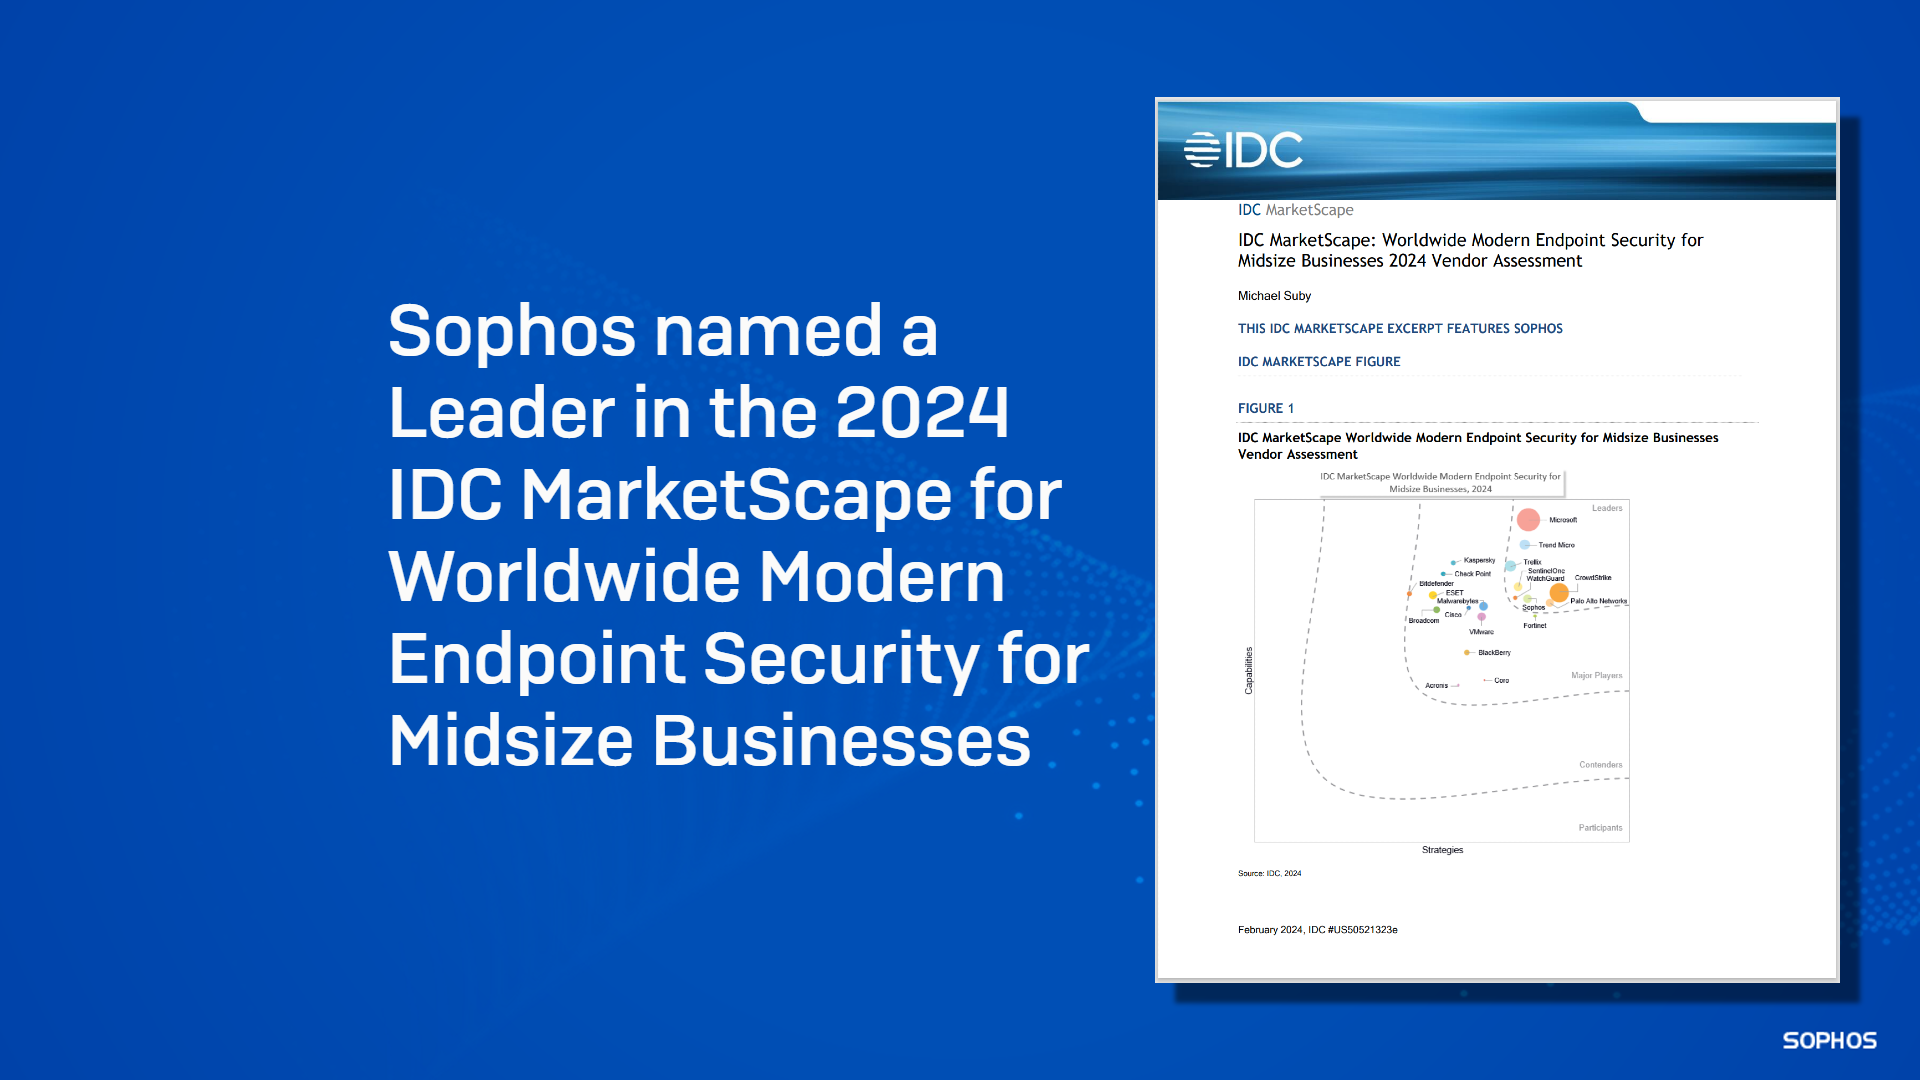 Sophos named a Leader in the 2024 IDC MarketScape for Worldwide Modern
Endpoint Security for Midsize Businesses